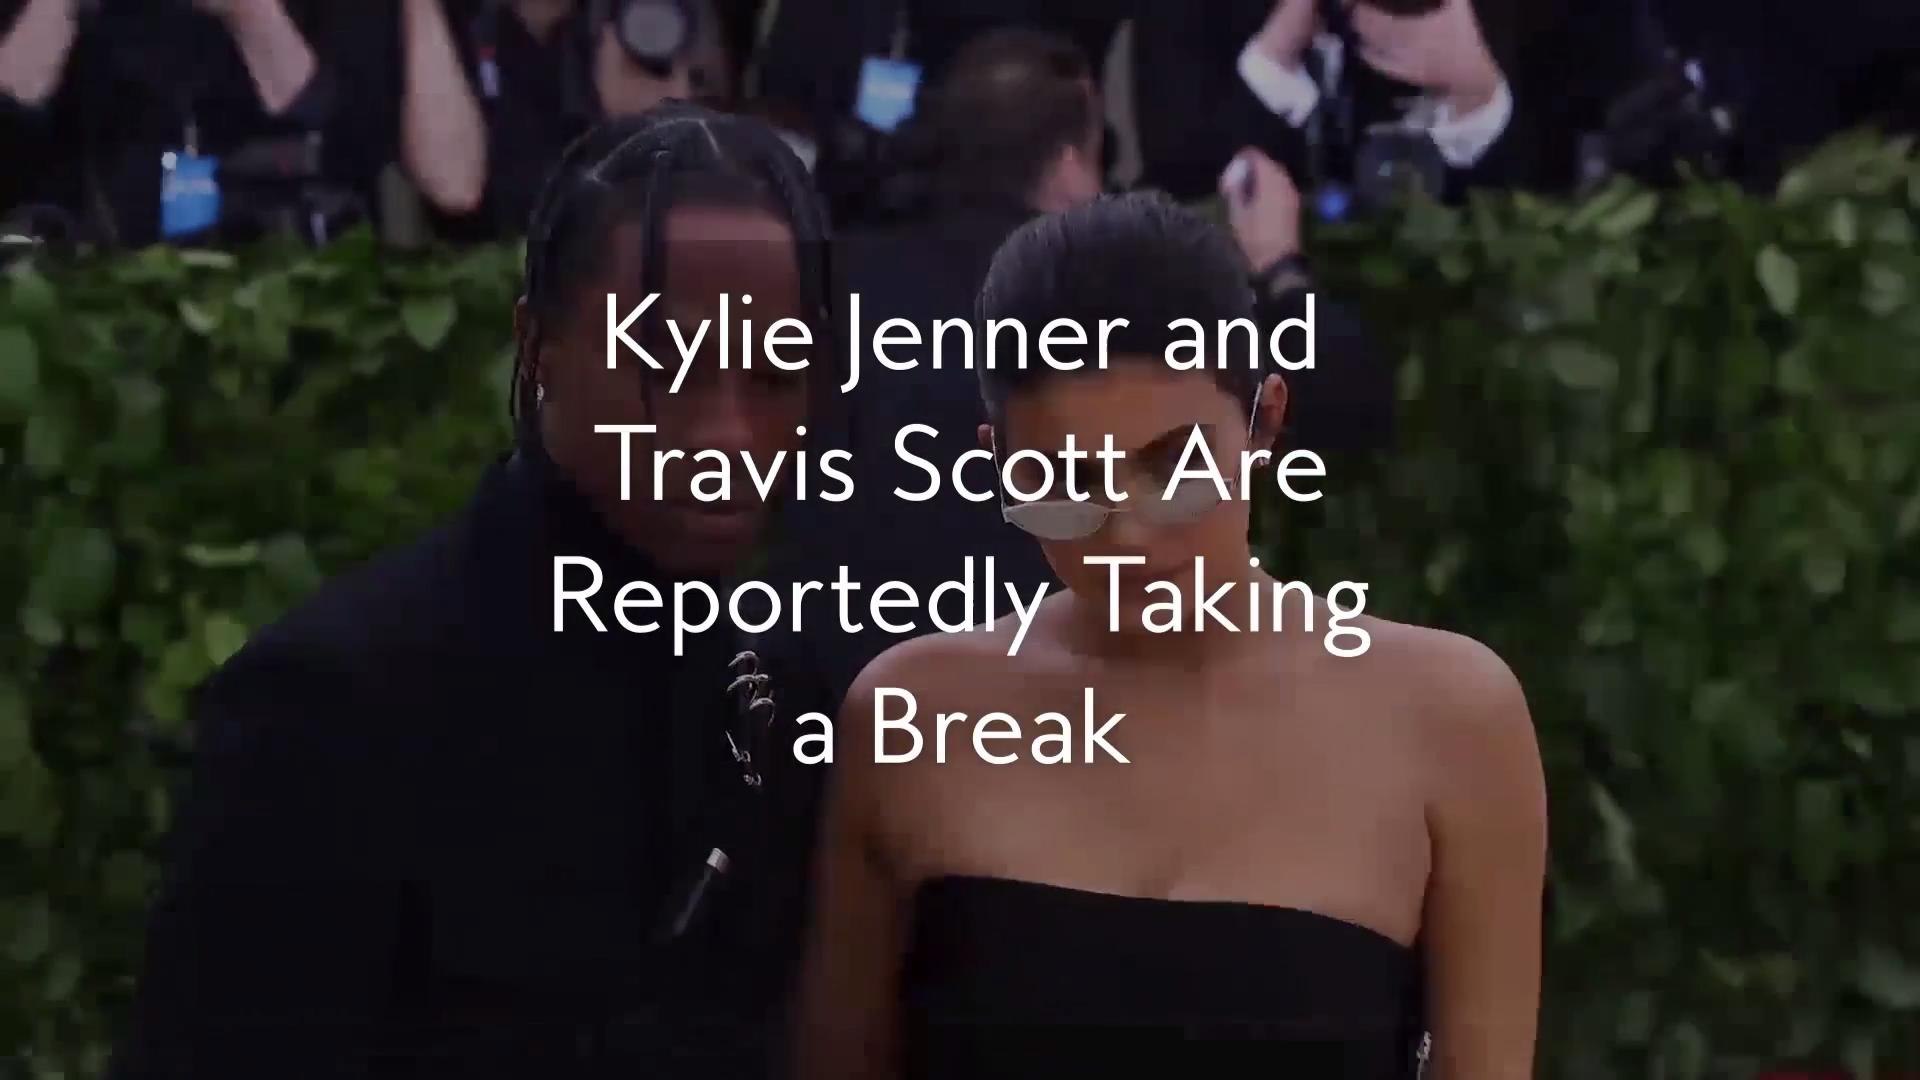 Kylie Jenner and Travis Scott Are Reportedly Taking a Break